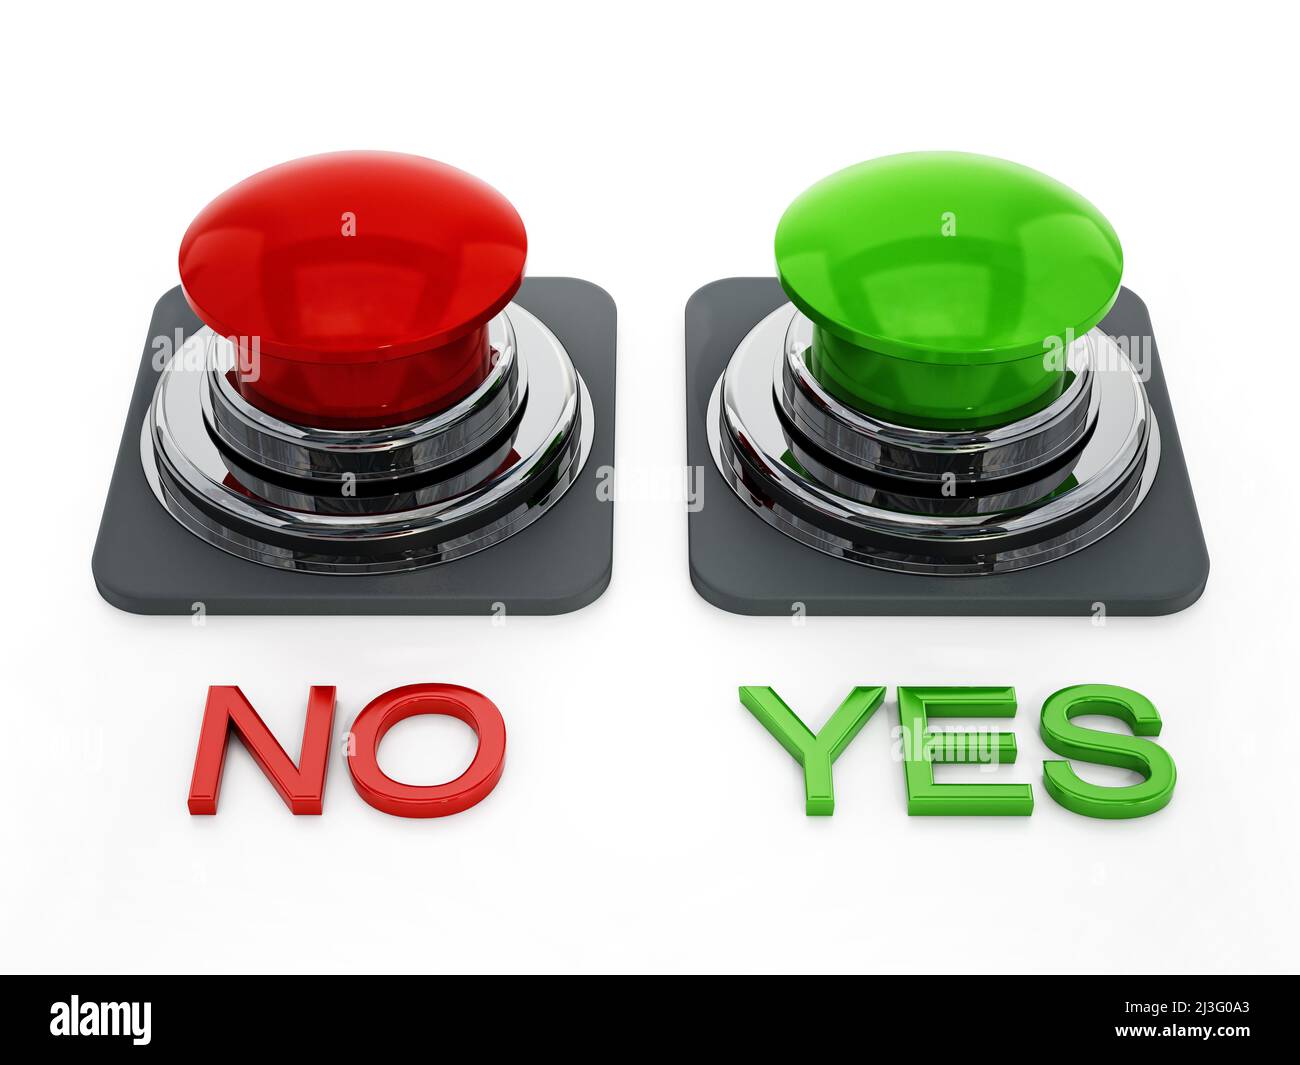 Yes and no buttons isolated on white background. 3D illustration. Stock Photo